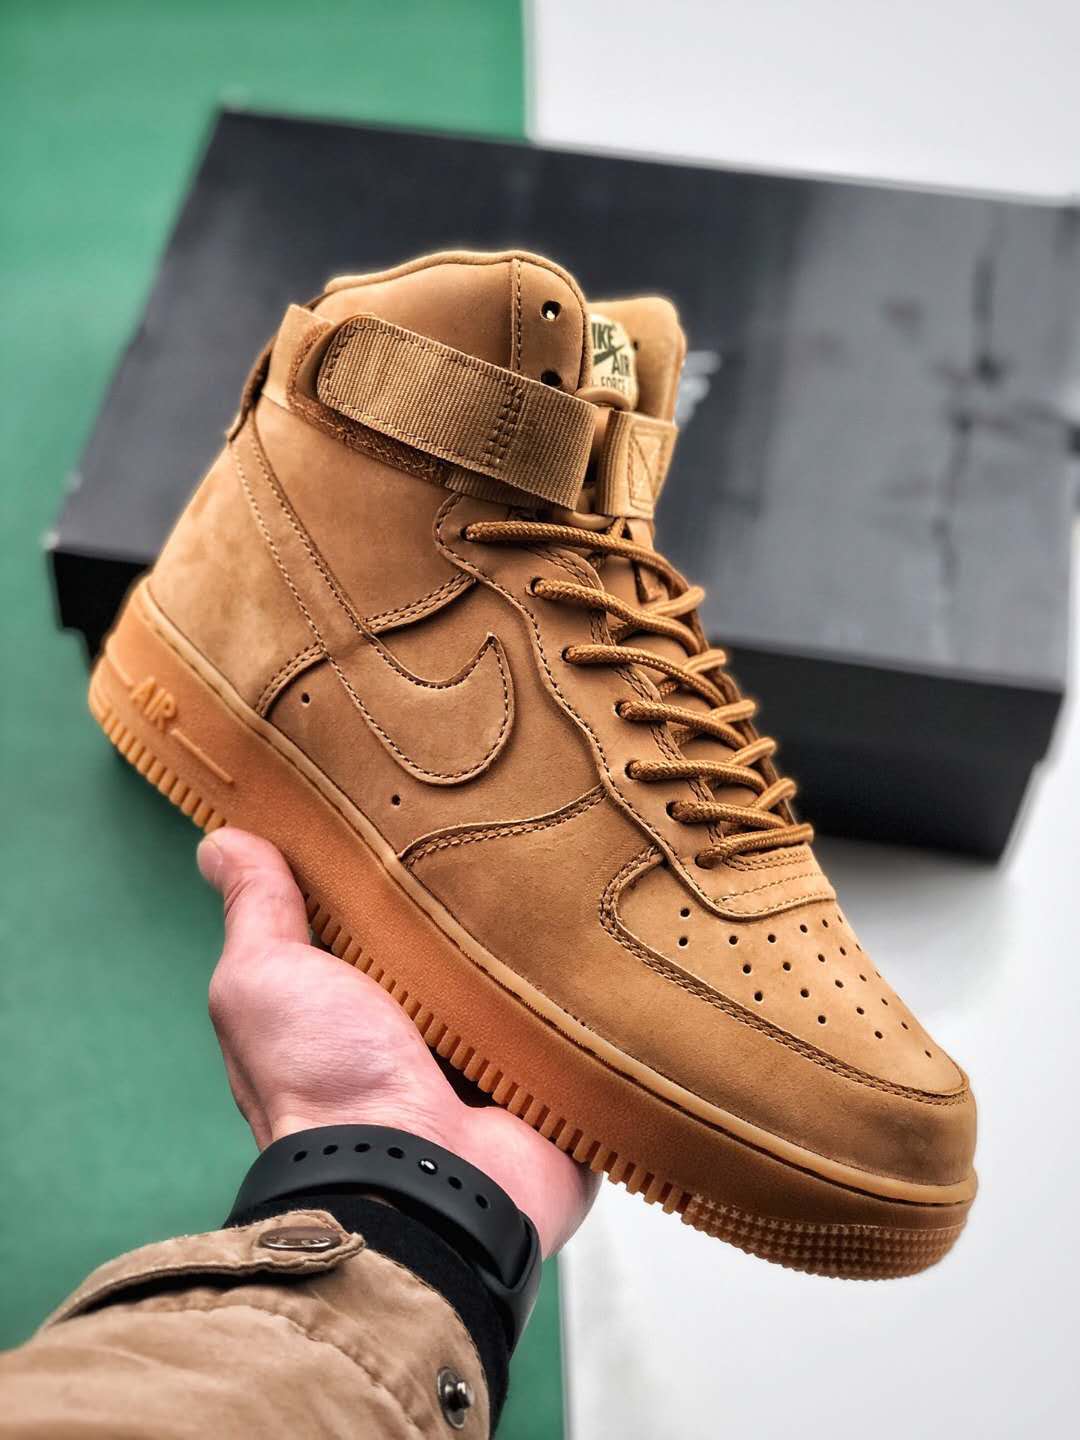 Nike Air Force 1 High Flax 882096-200 - Stylish and Iconic Sneakers